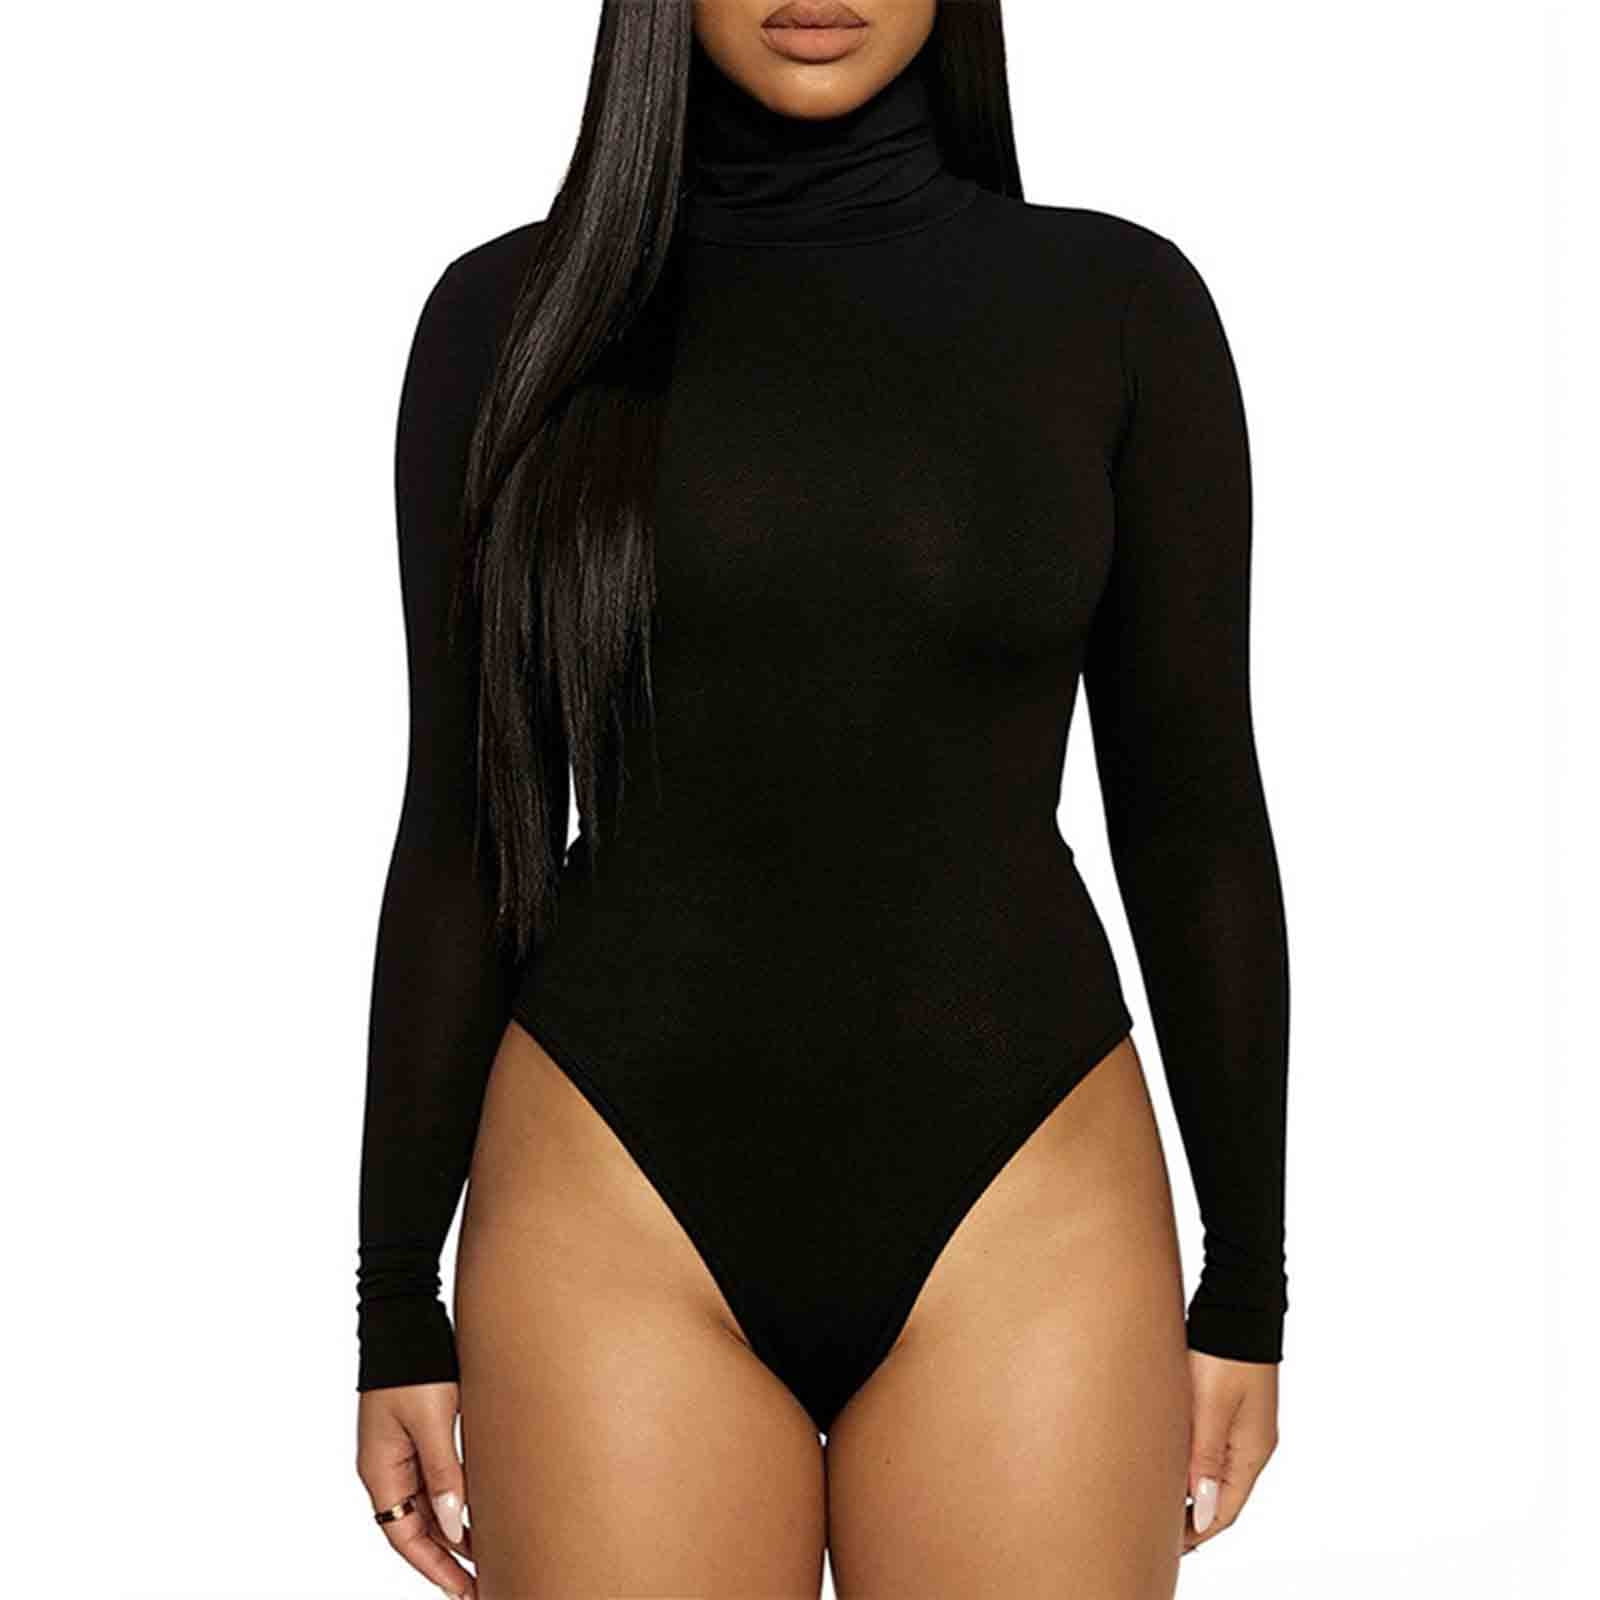  Sexy Bodysuit Tops for Women Solid Collared Tee Black